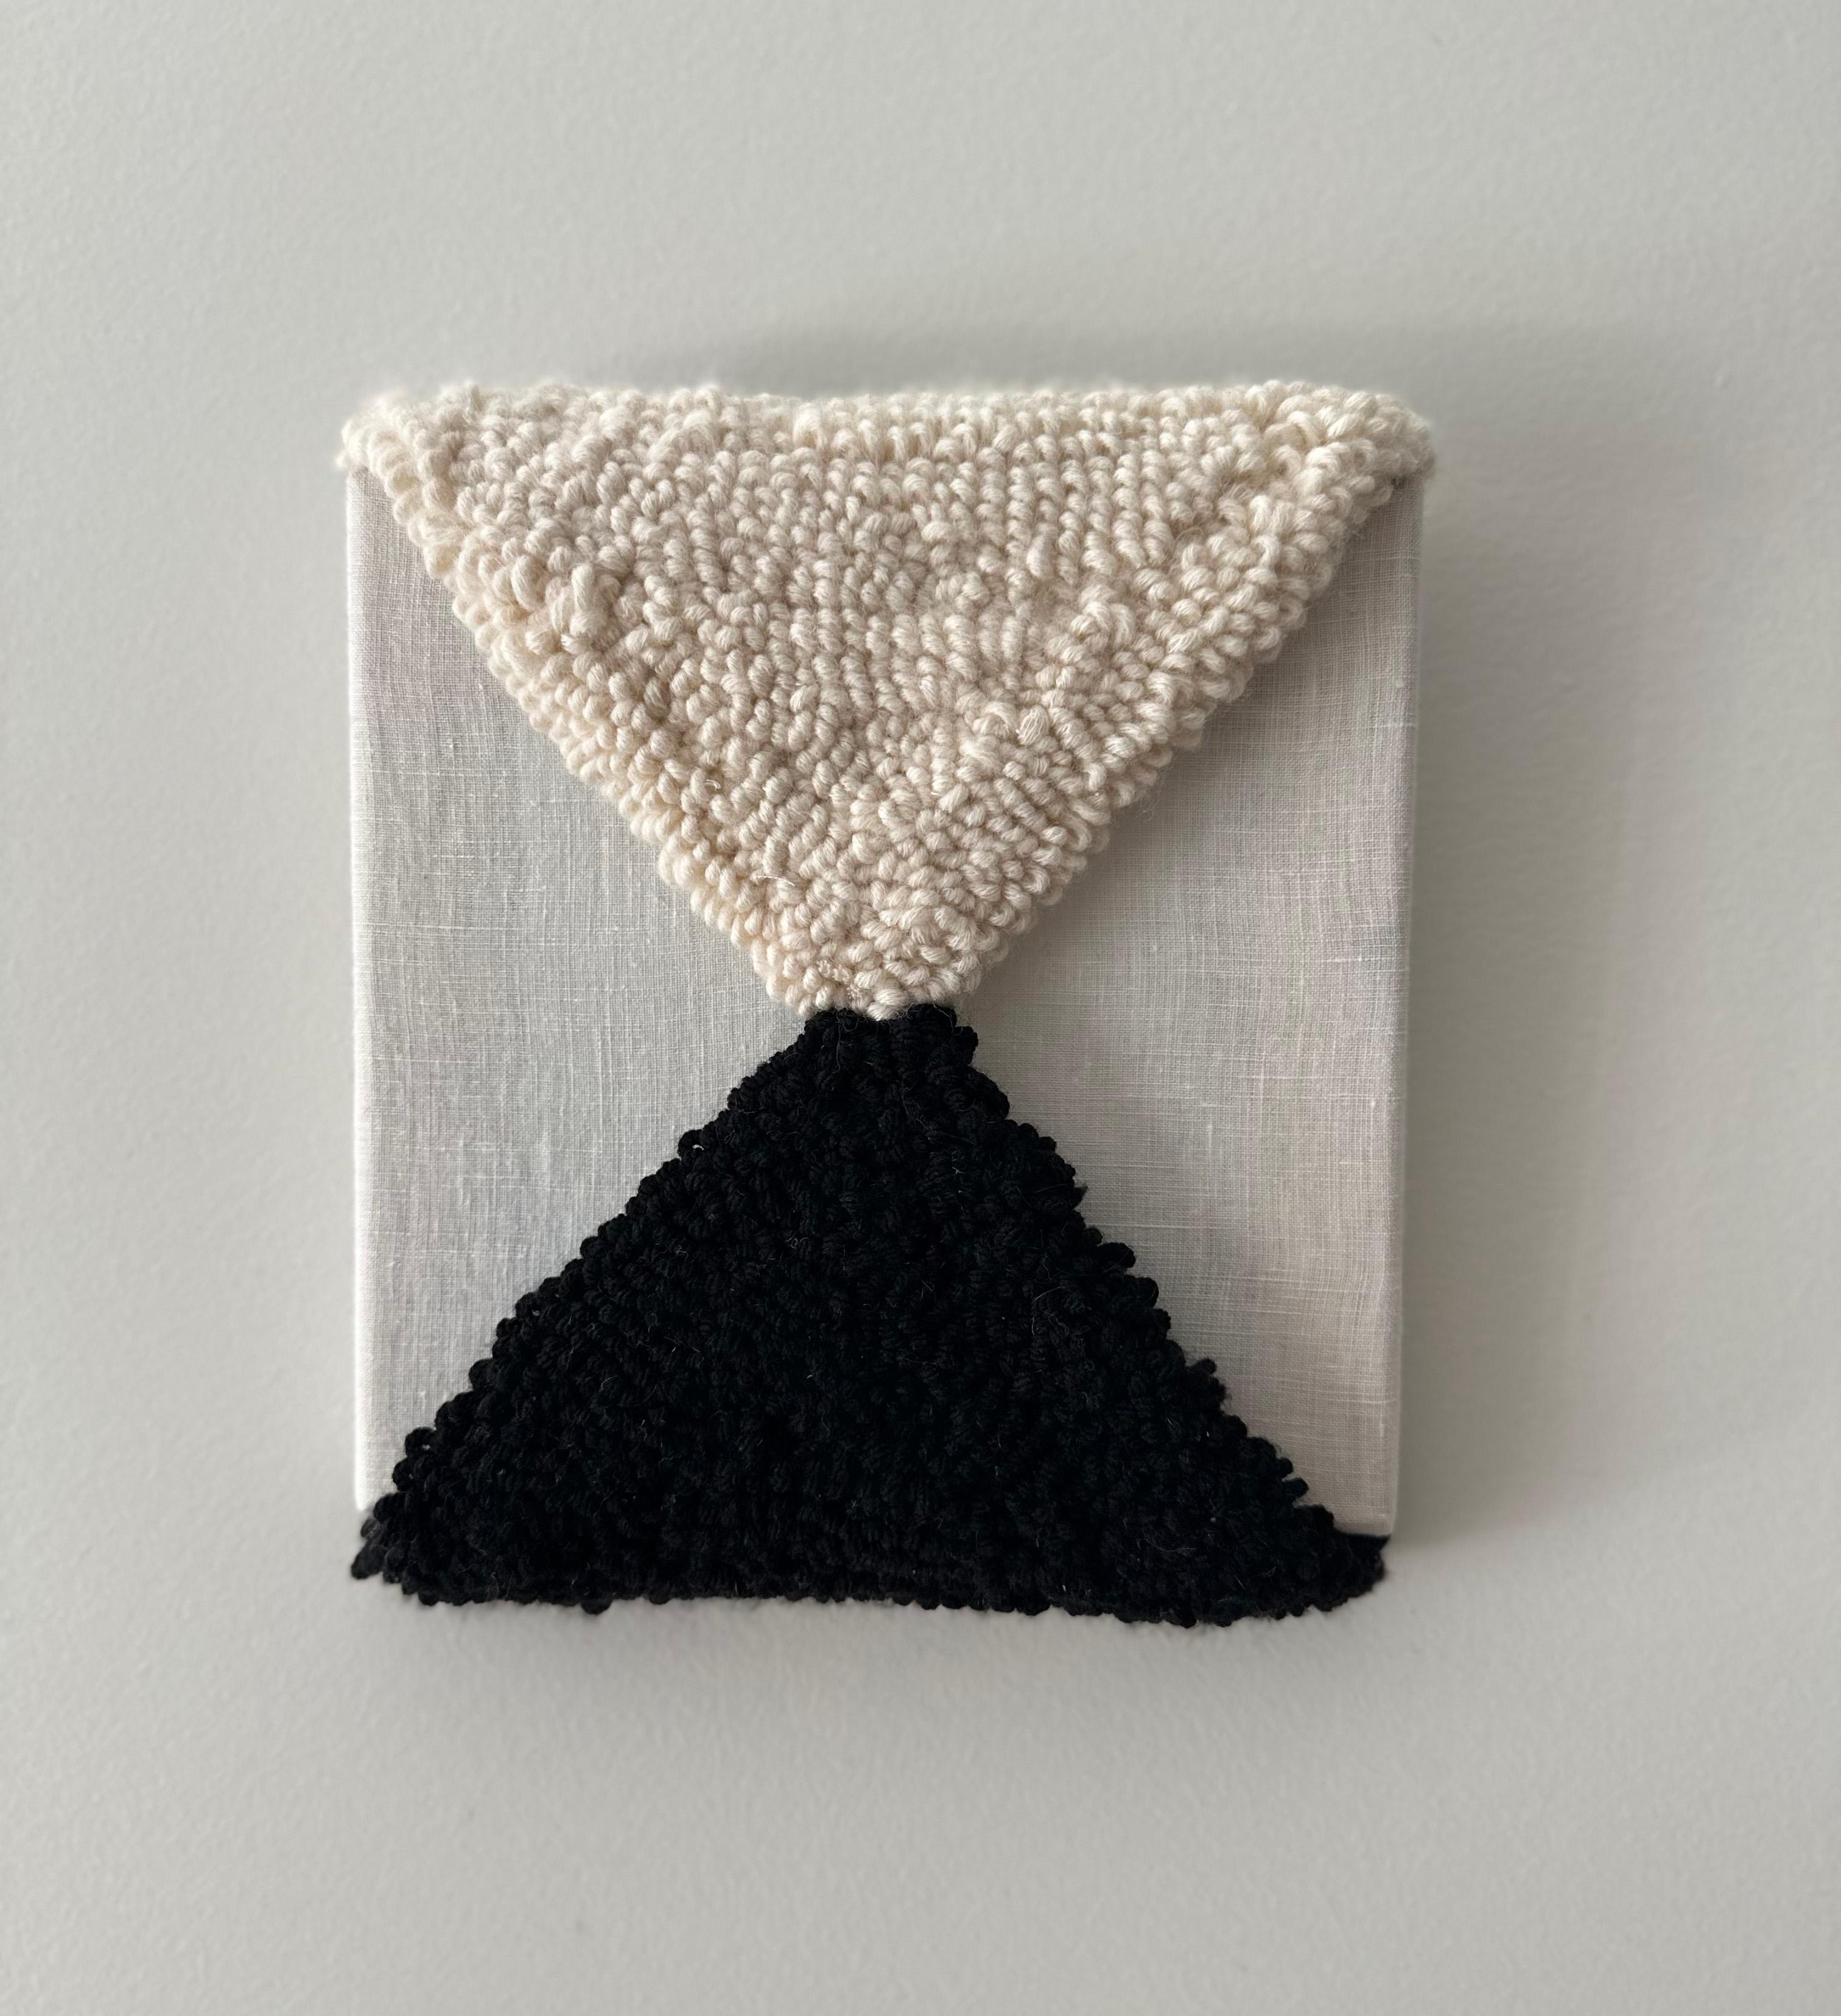 Balance, texture, textile, pattern, black and white, neutrals - Sculpture by Ana Maria Farina